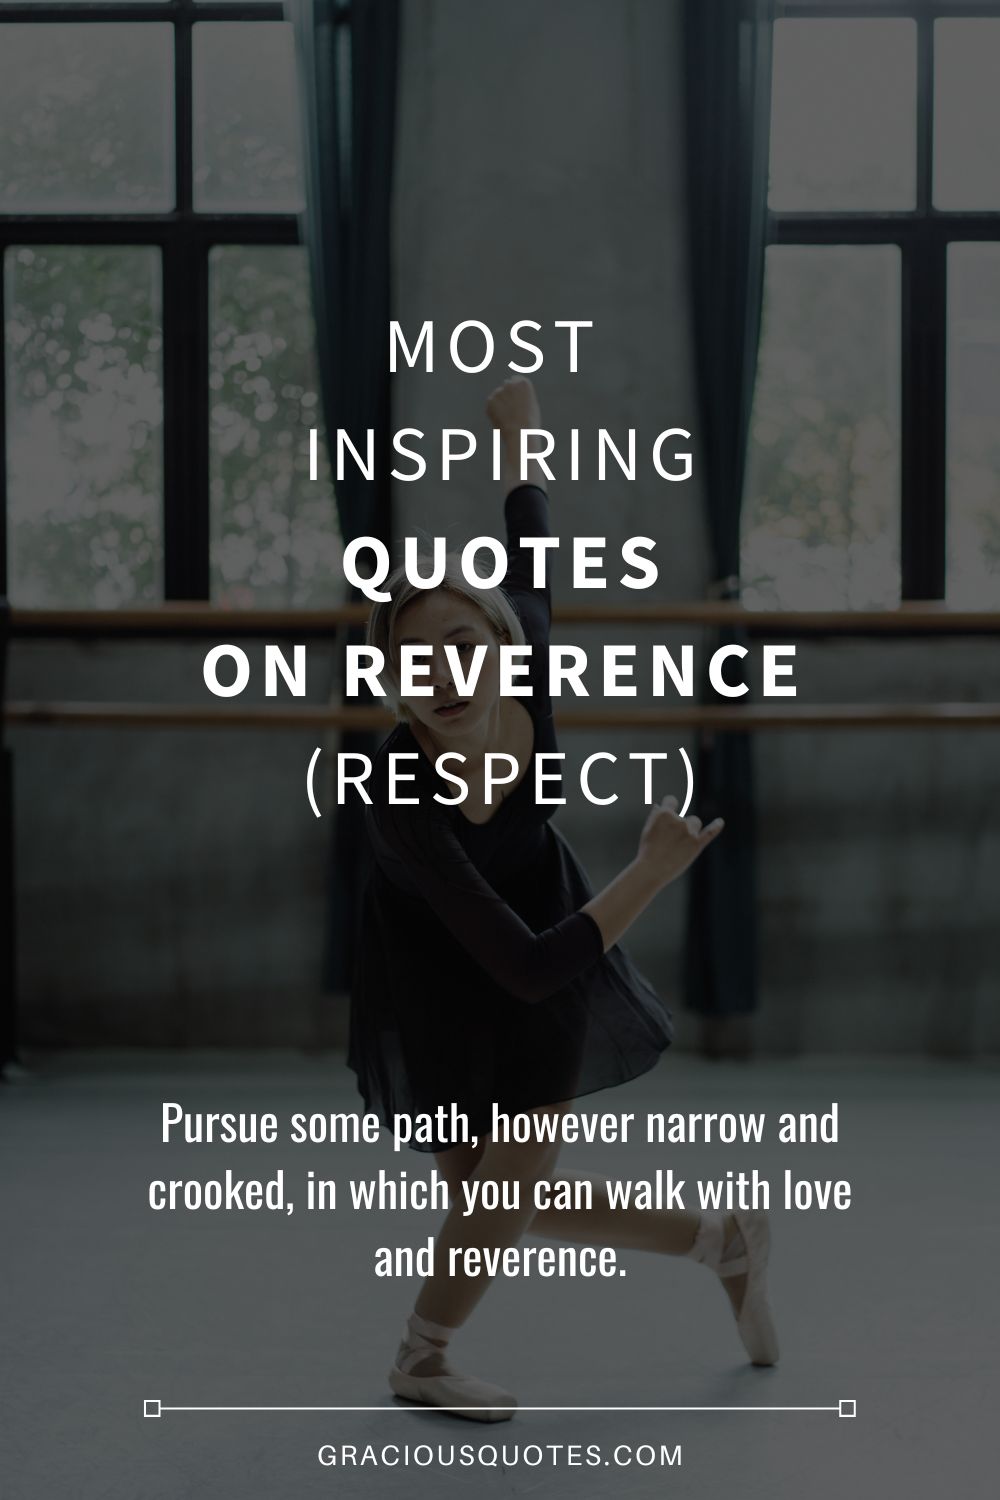 Most Inspiring Quotes on Reverence (RESPECT) - Gracious Quotes